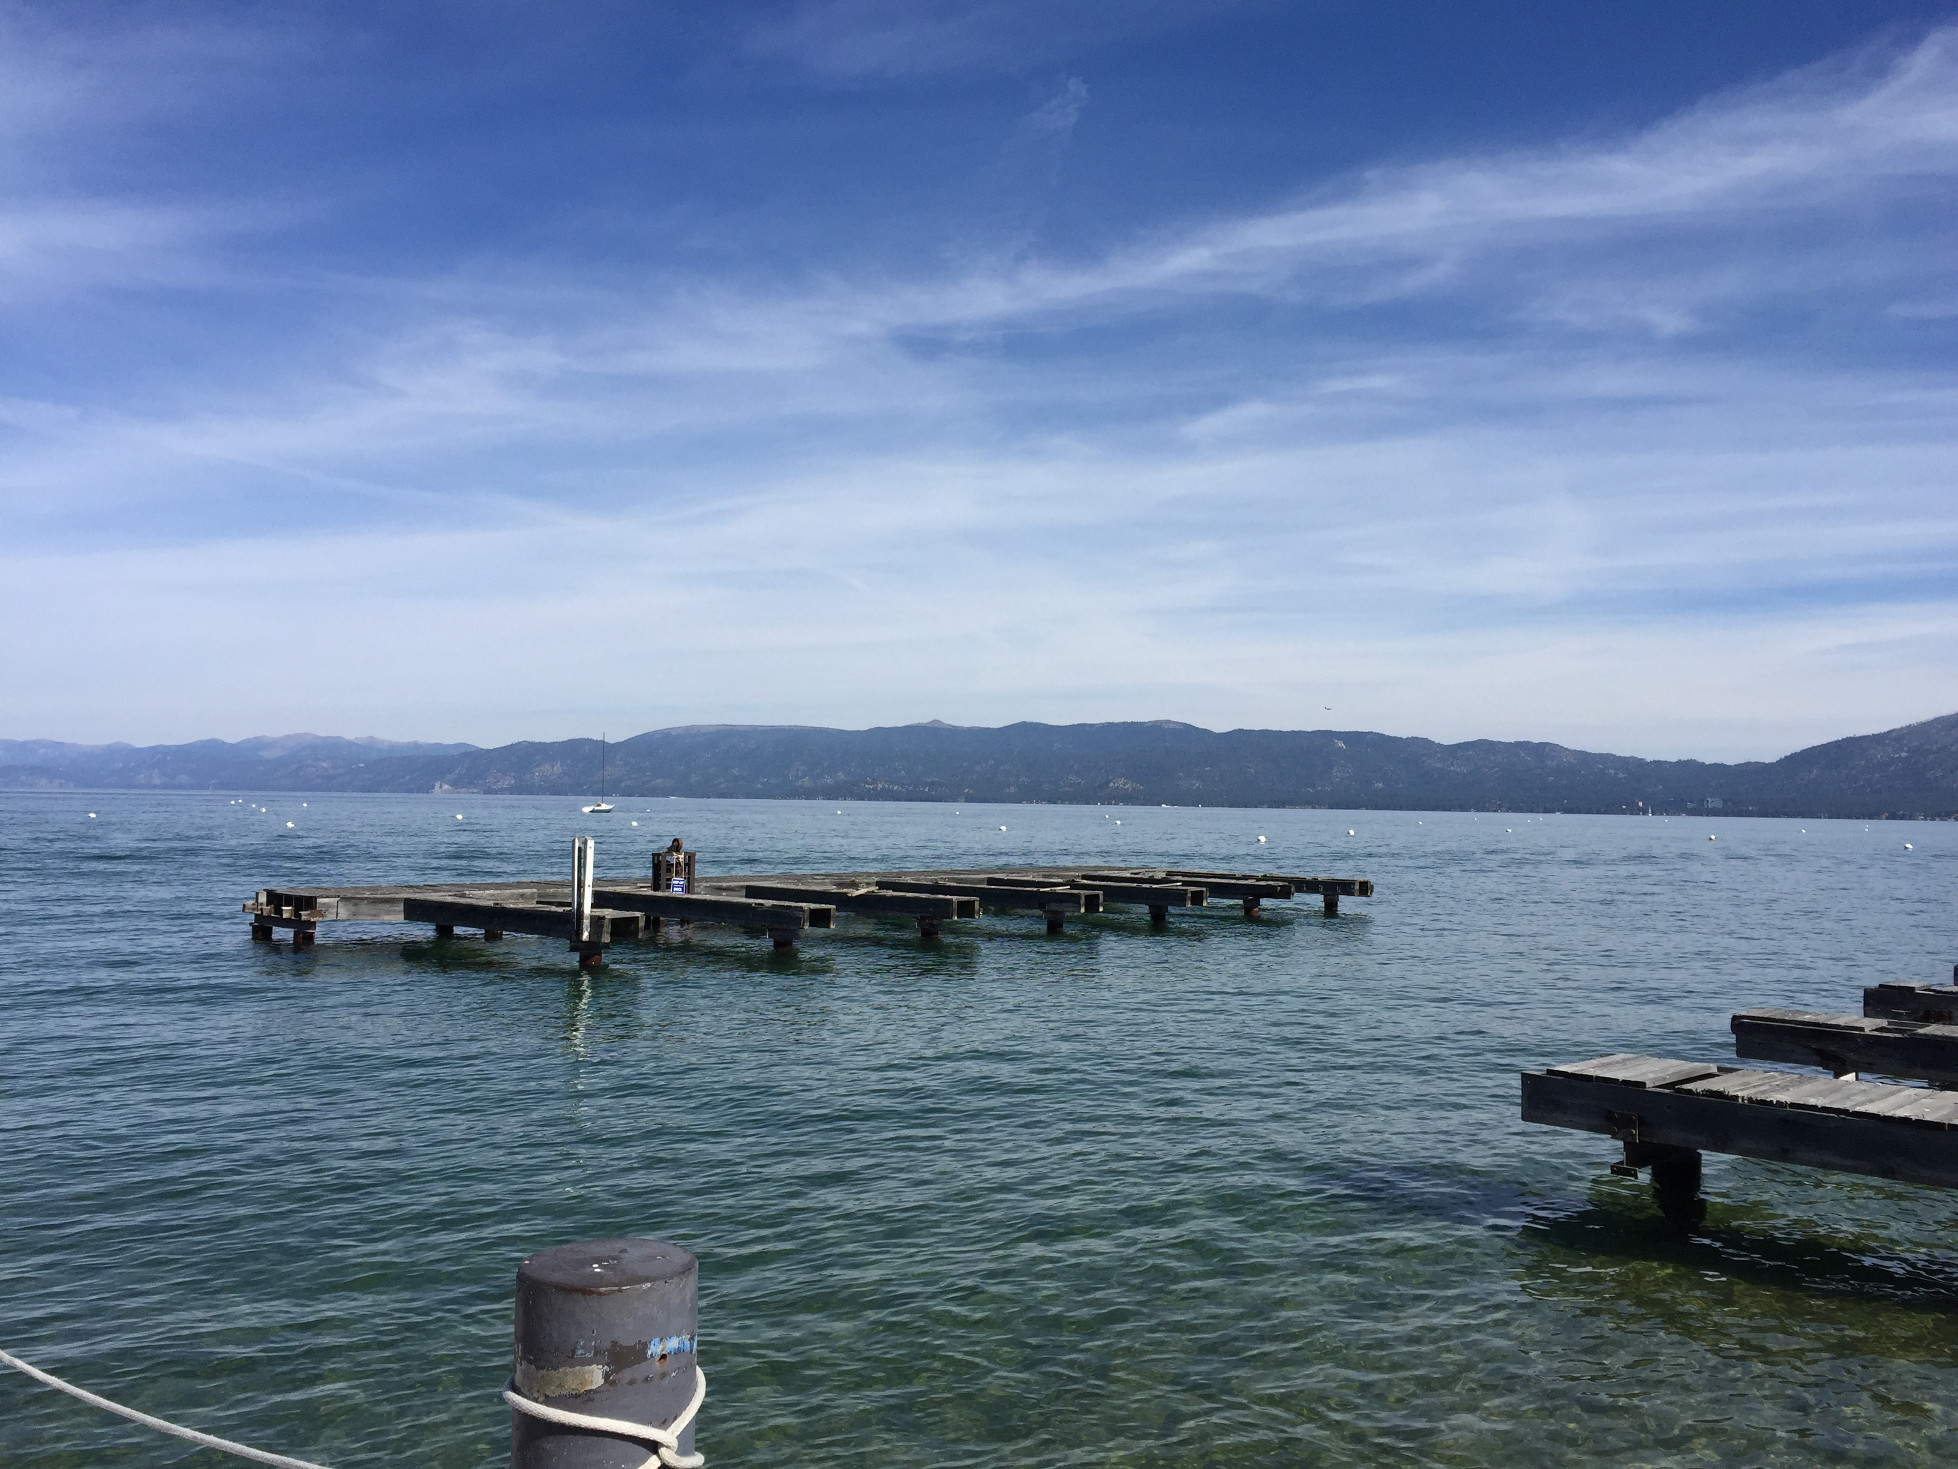 Searching for a South Lake Tahoe Restaurant? - Those Someday Goals